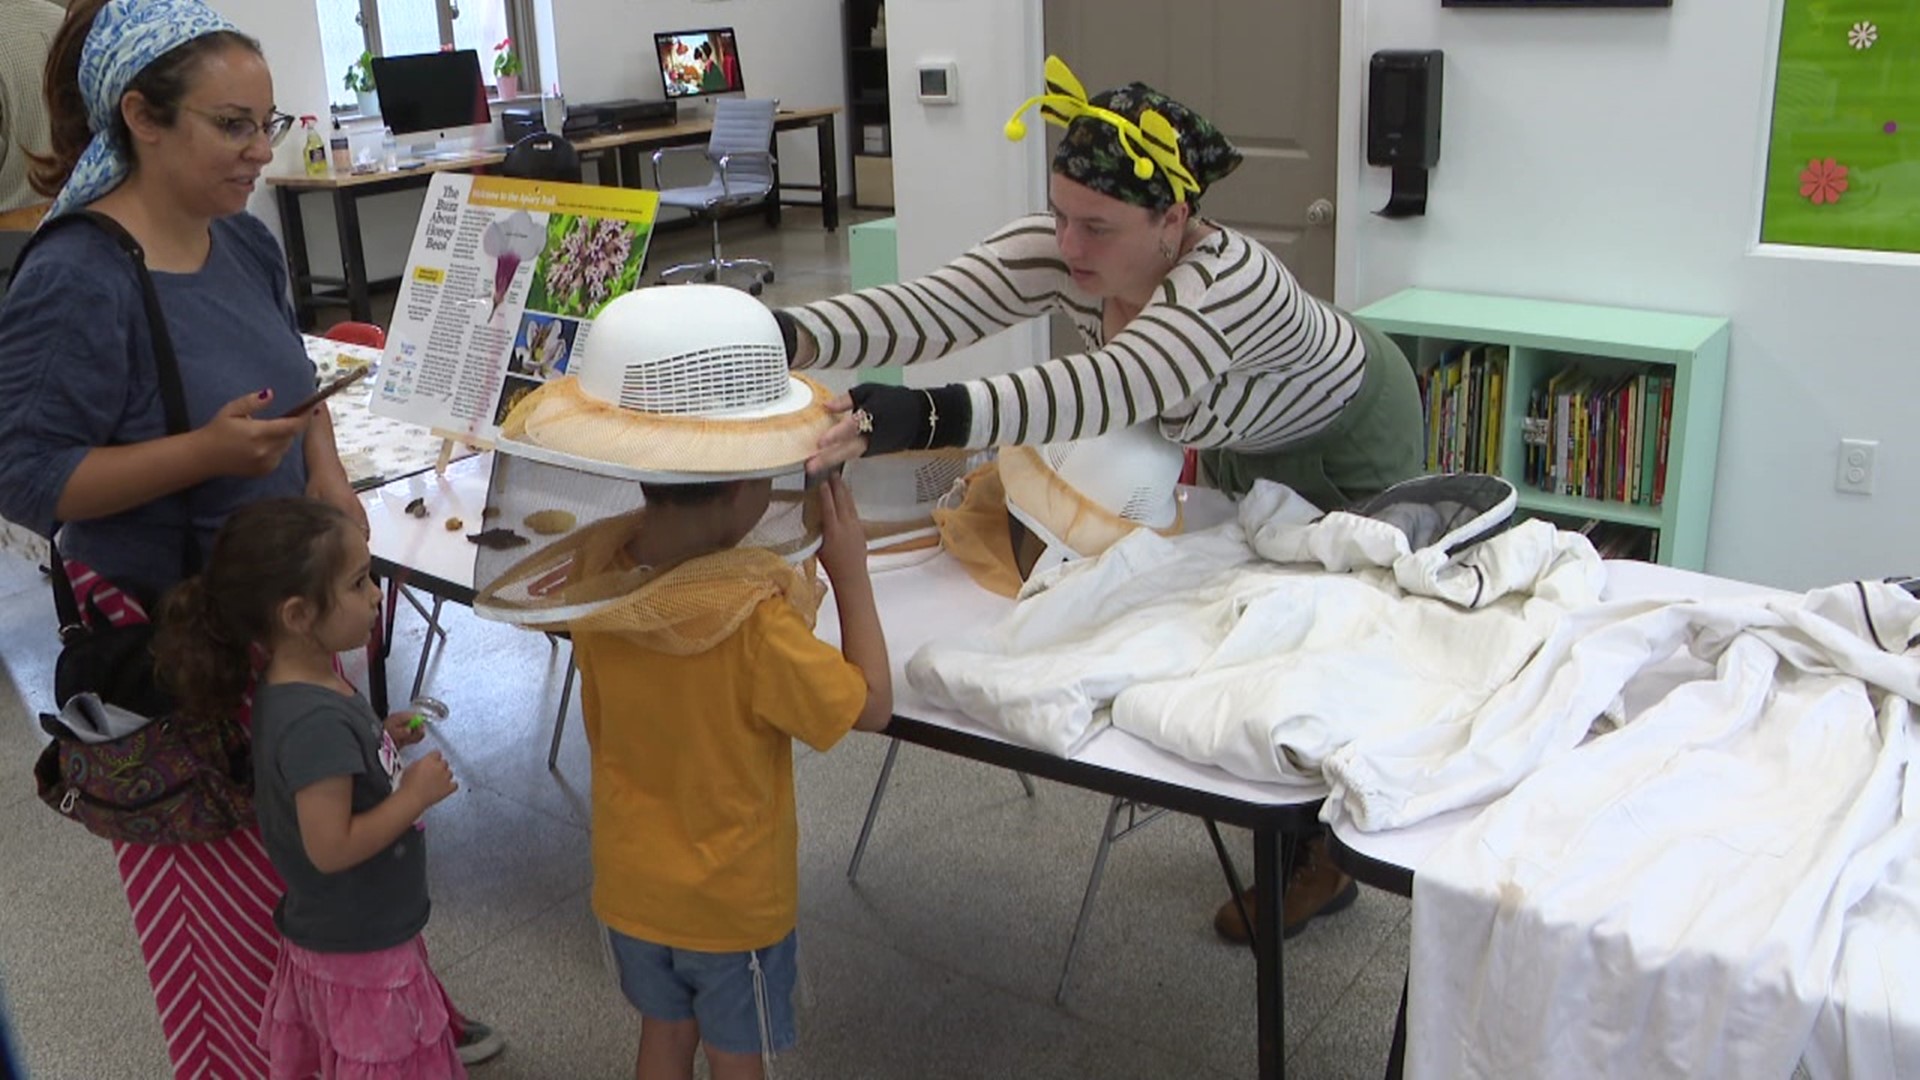 Attendees got the chance to see real bees in a hive, try on a beekeeping suit, and taste some honey.